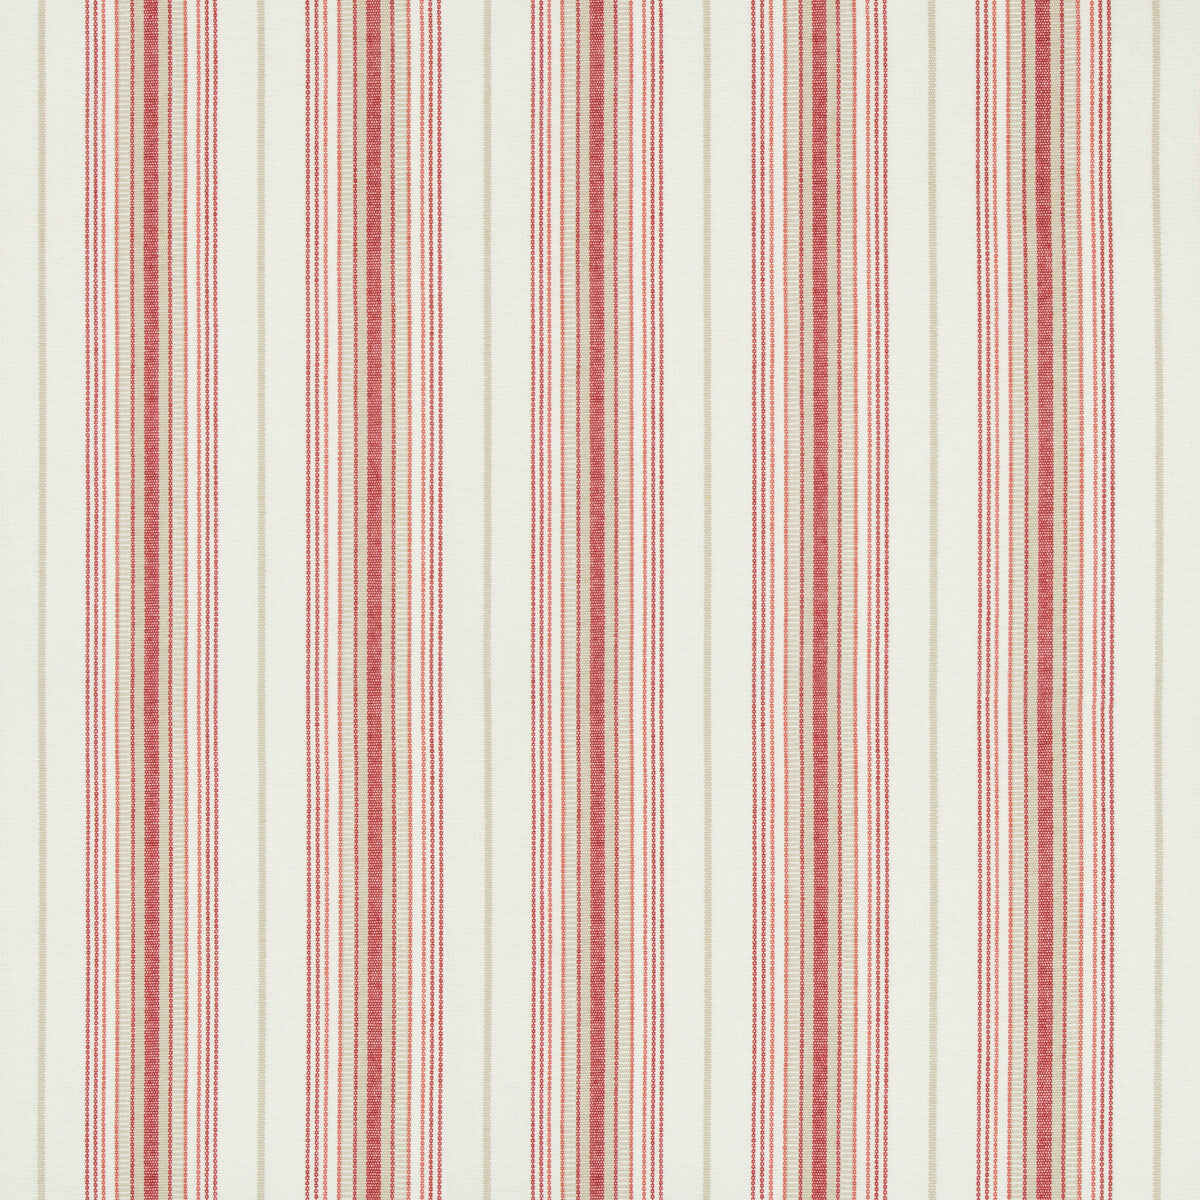 Cassis Stripe fabric in red color - pattern 2018147.119.0 - by Lee Jofa in the Suzanne Kasler The Riviera collection